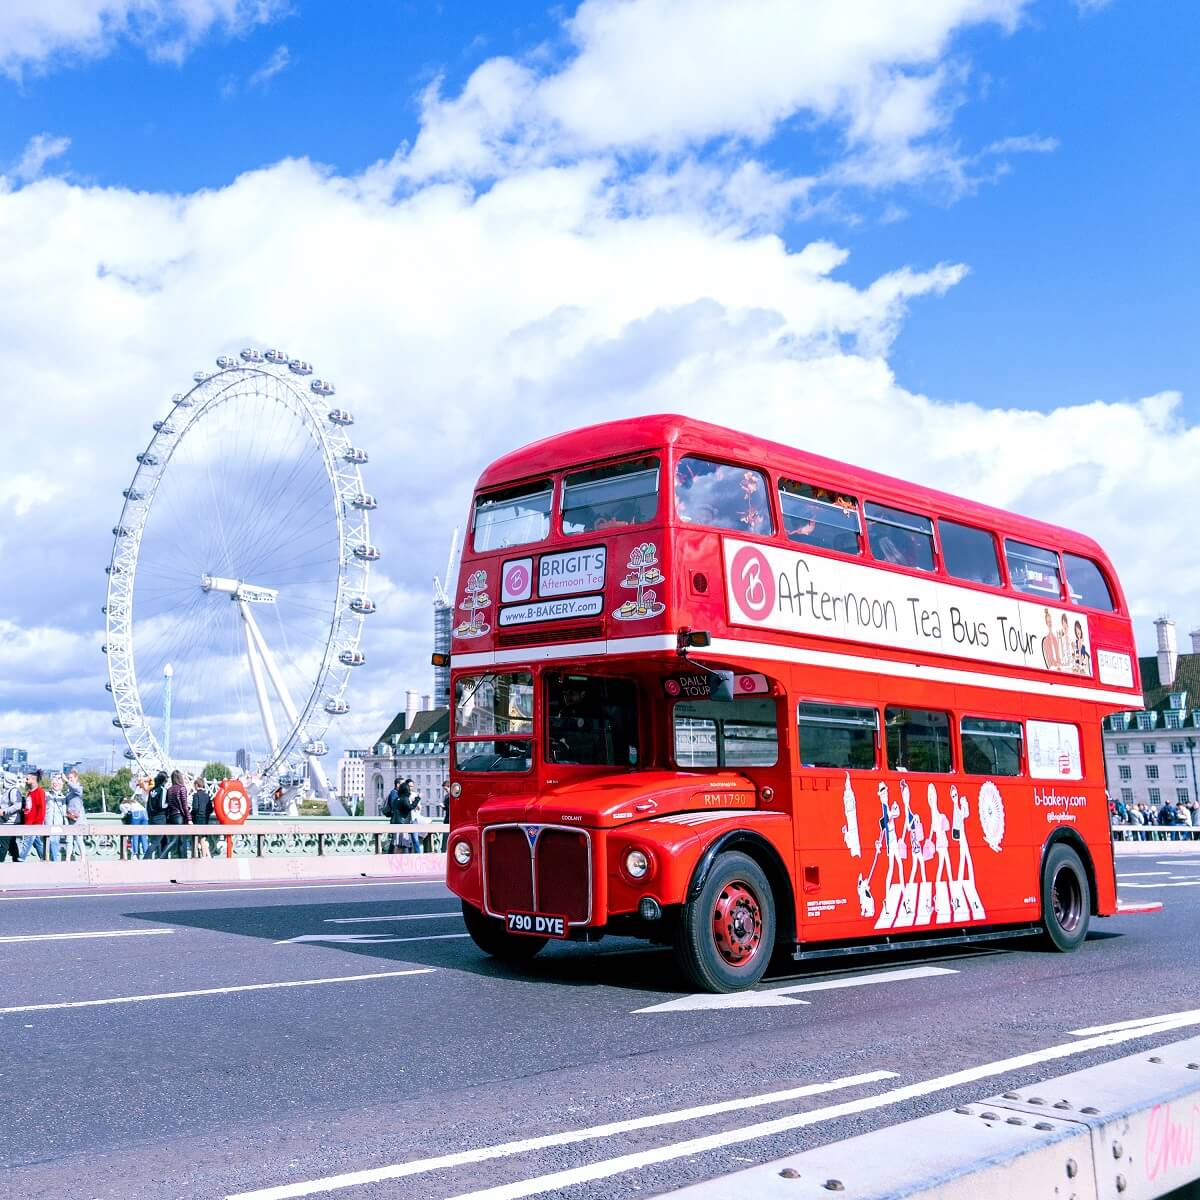 Iconic red Routemaster bus to feature at WTM London 2019